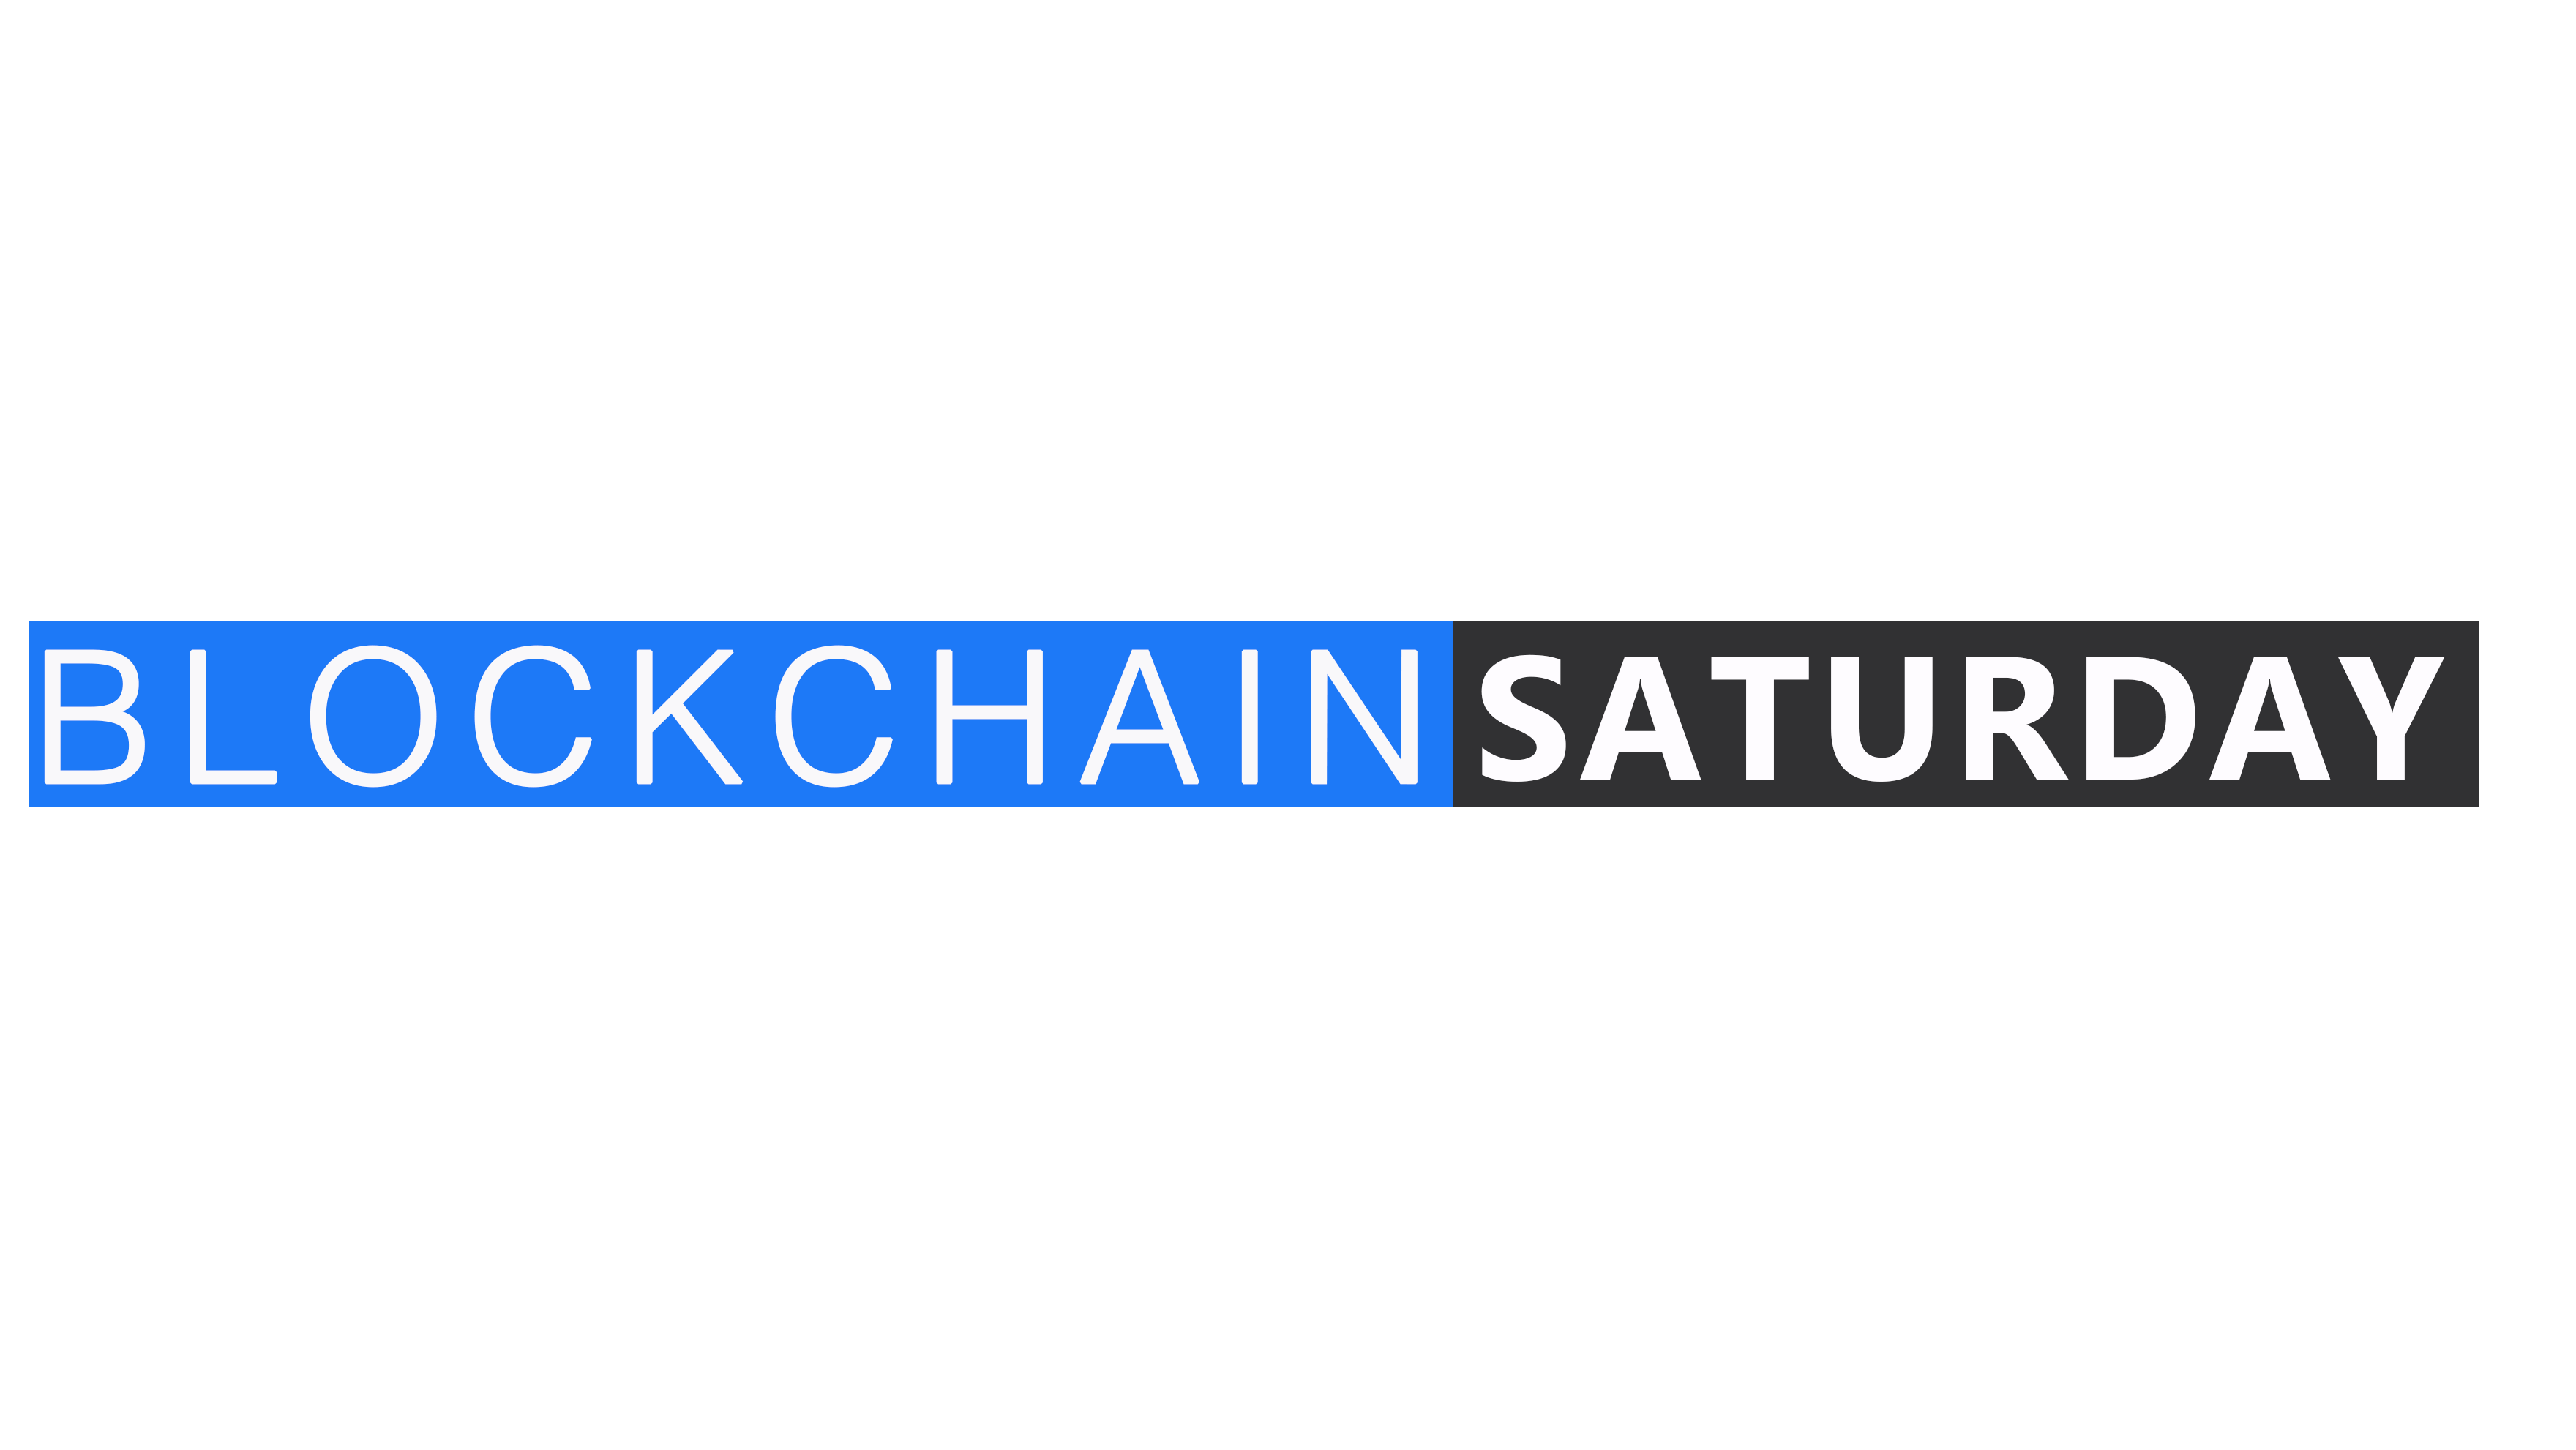 Blockchain Saturday Official New Logo 2.png